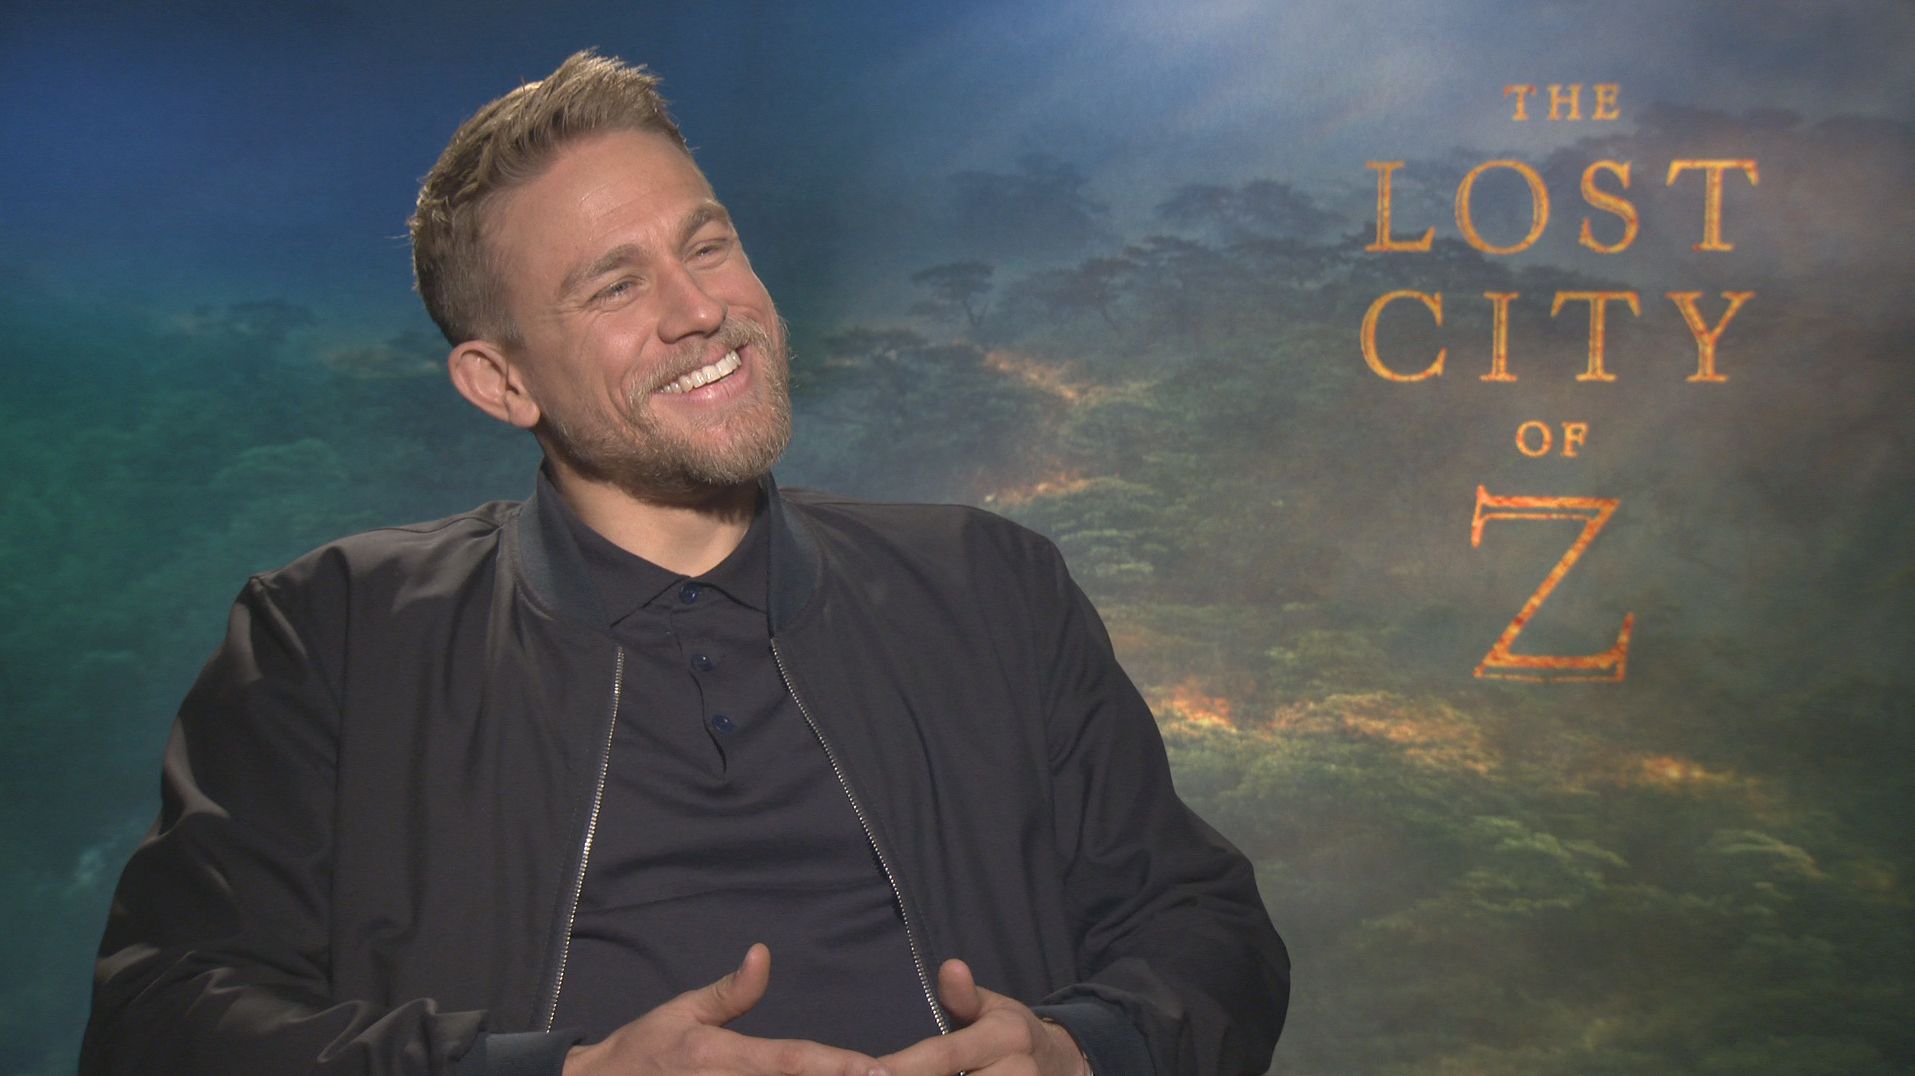 Charlie Hunnam on ‘The Lost City of Z’ and the Crazy Production | Collider